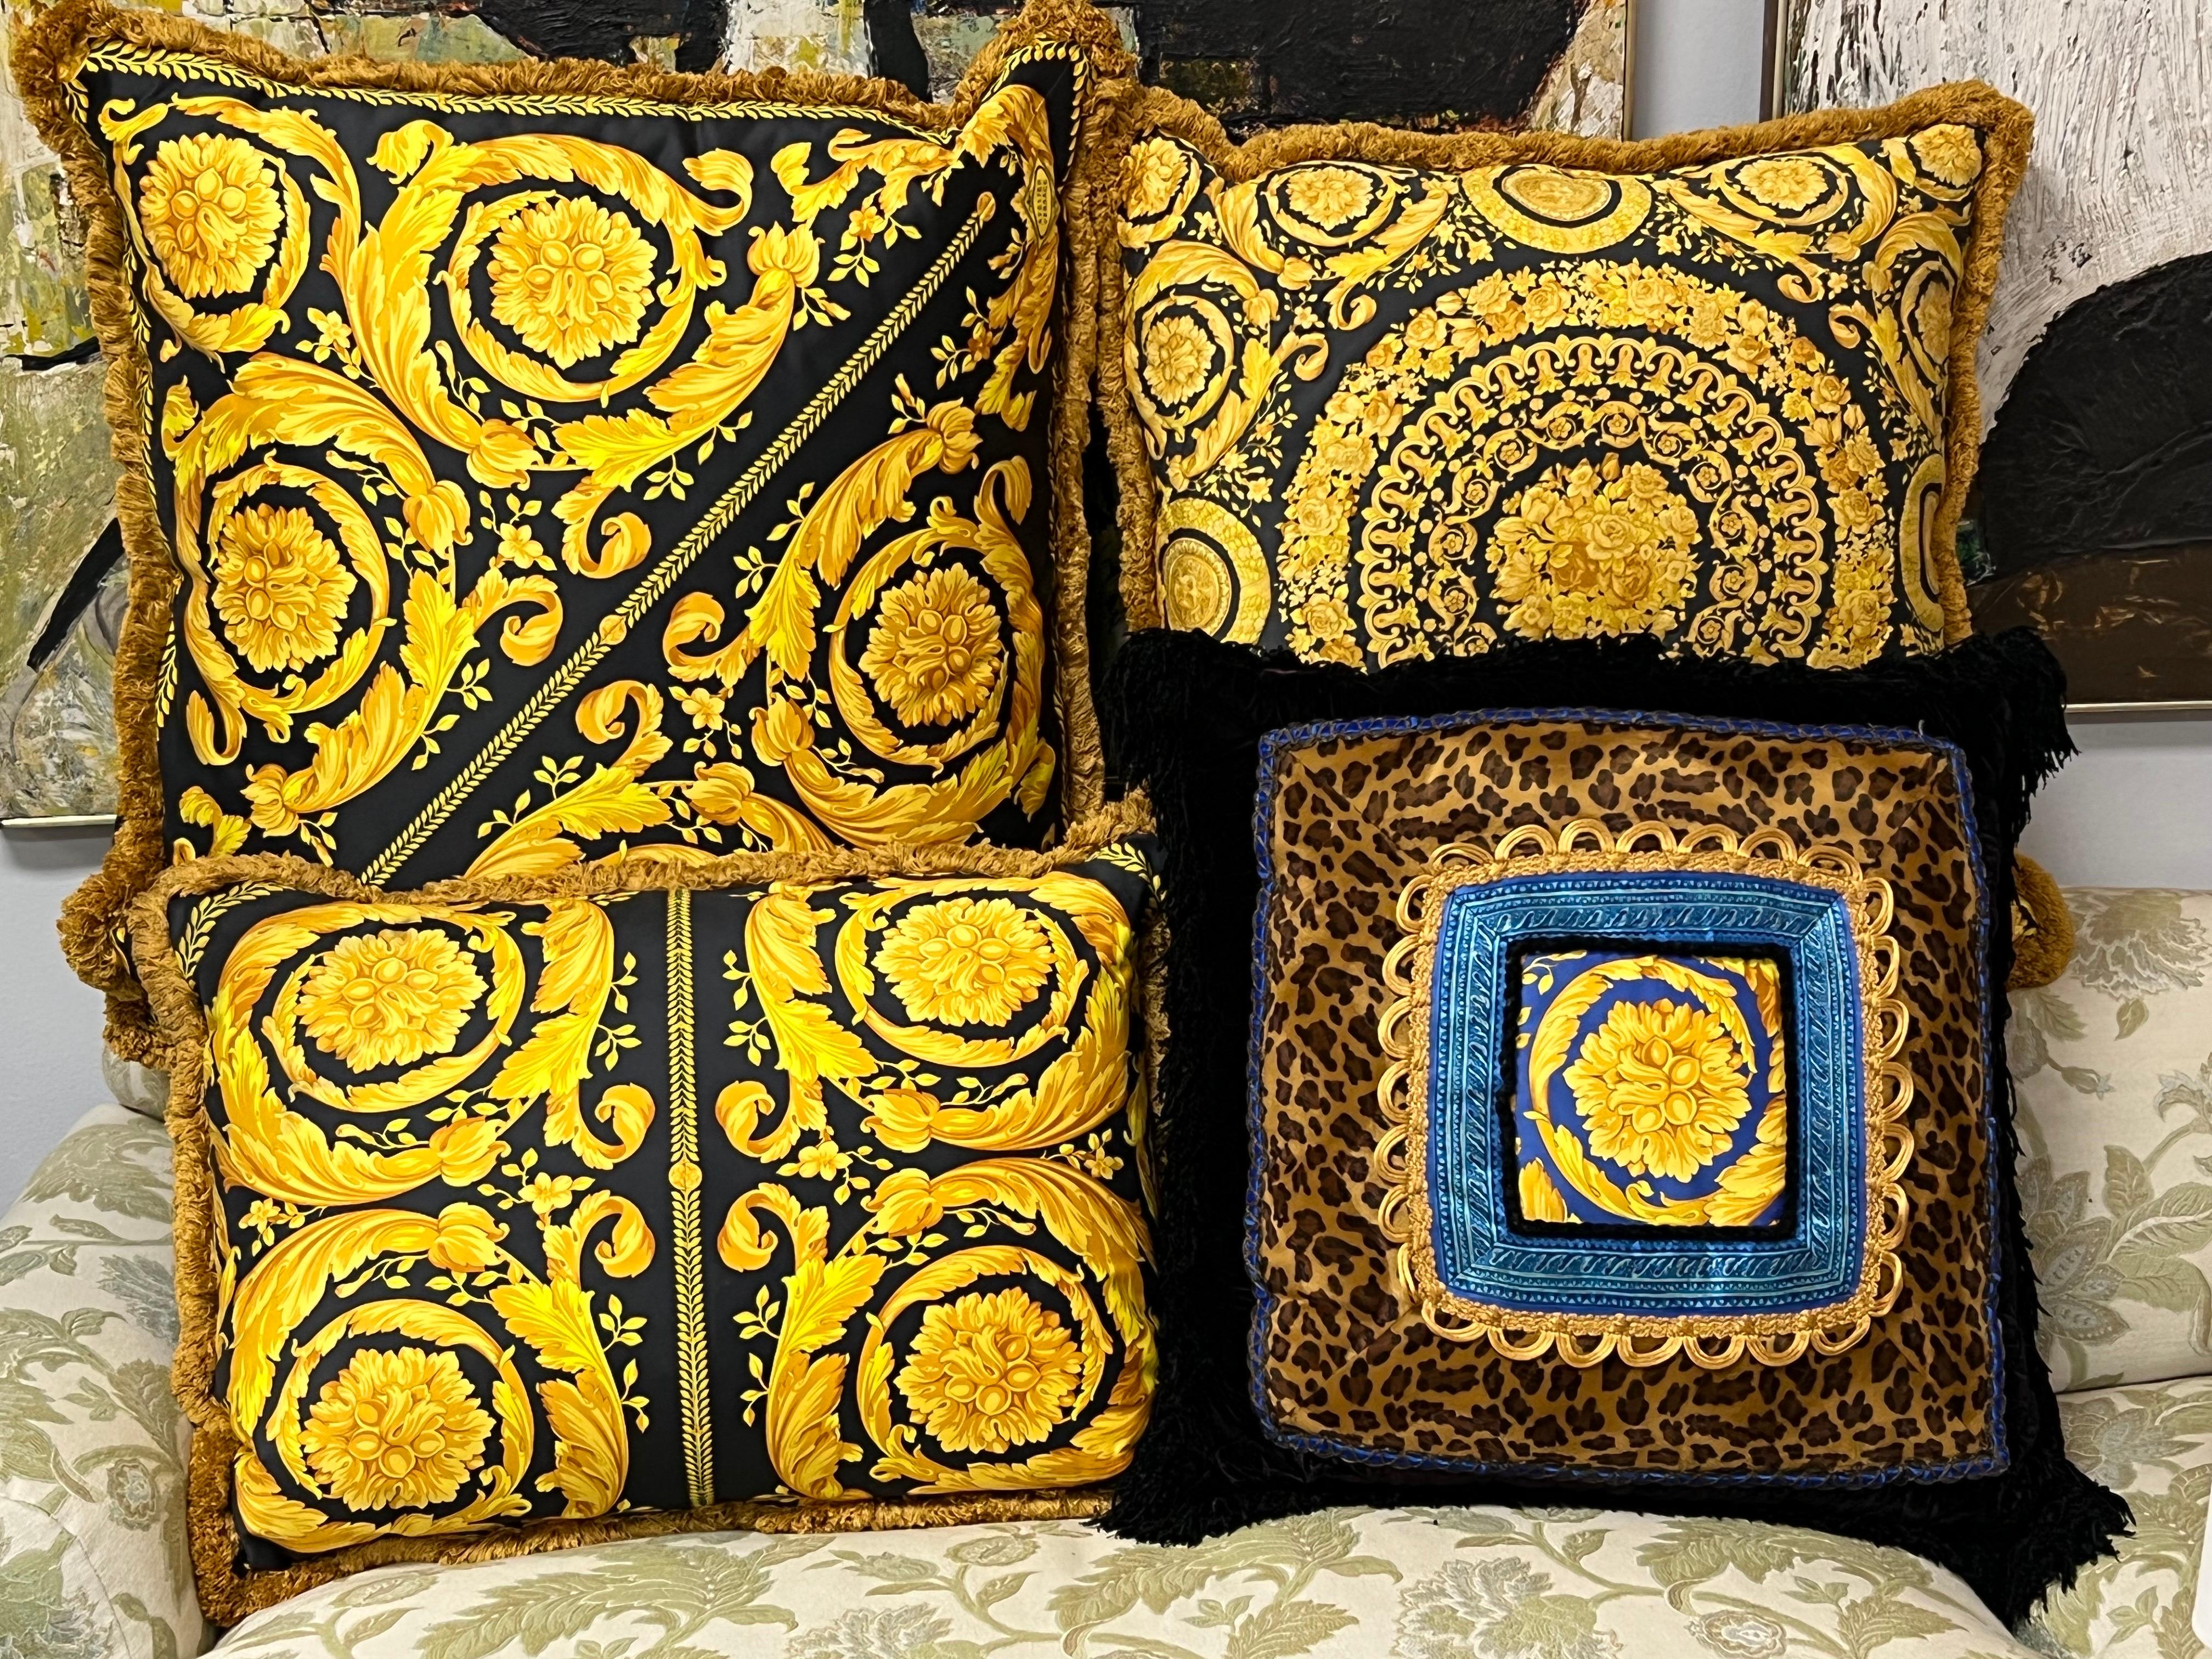 4 large Atelier Versace pillows. The largest is 30